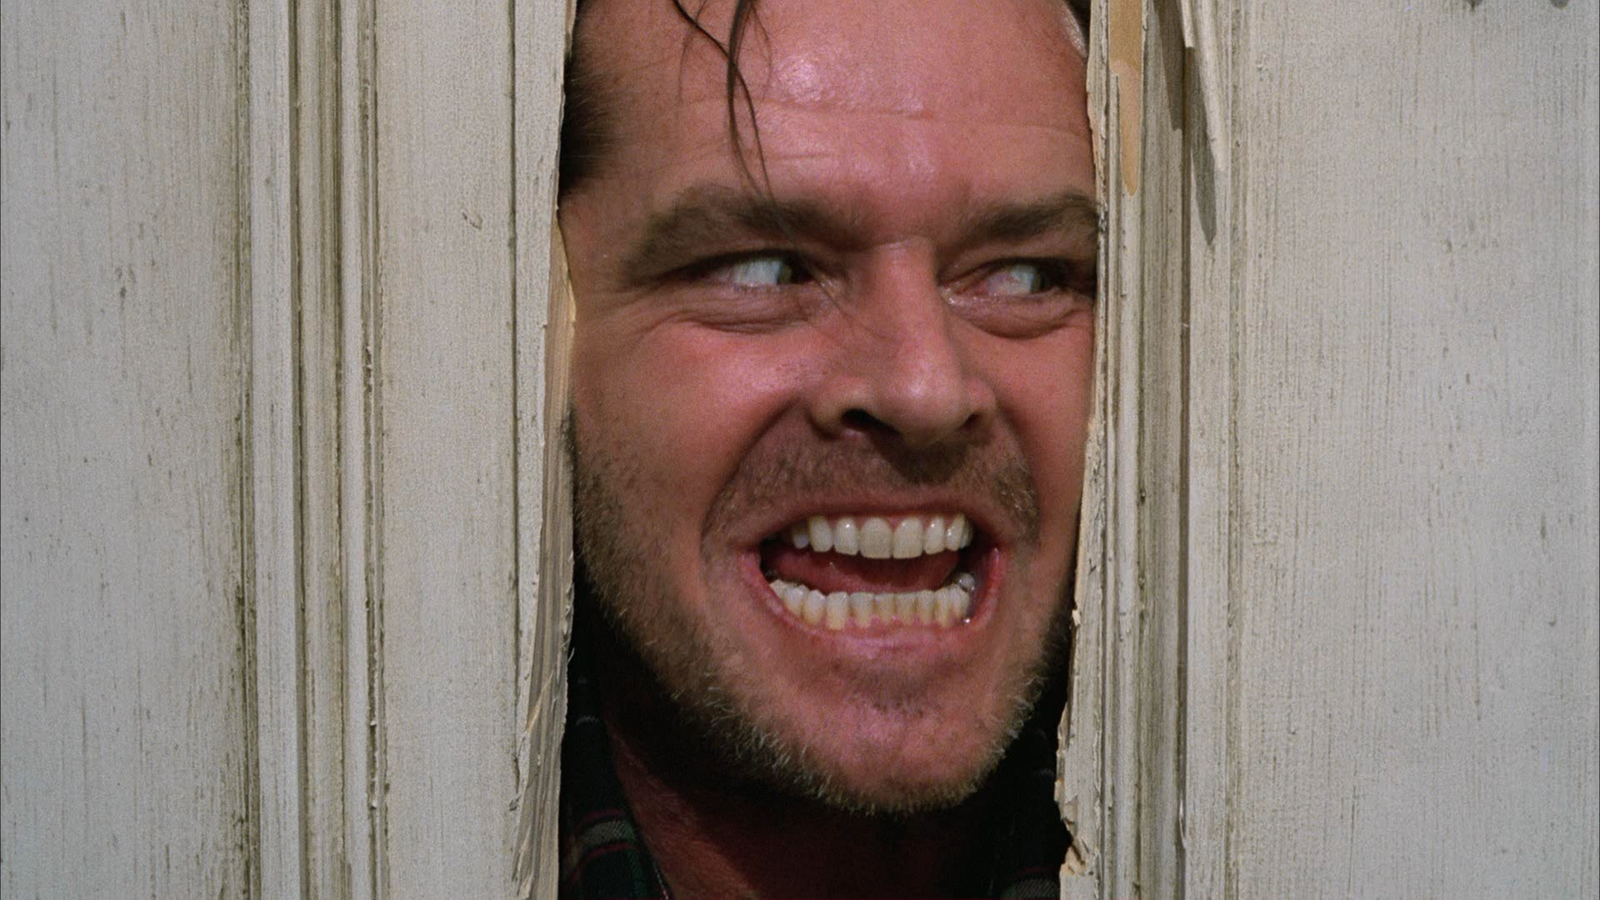 Jack Nicholson in the popular movie The Shining.